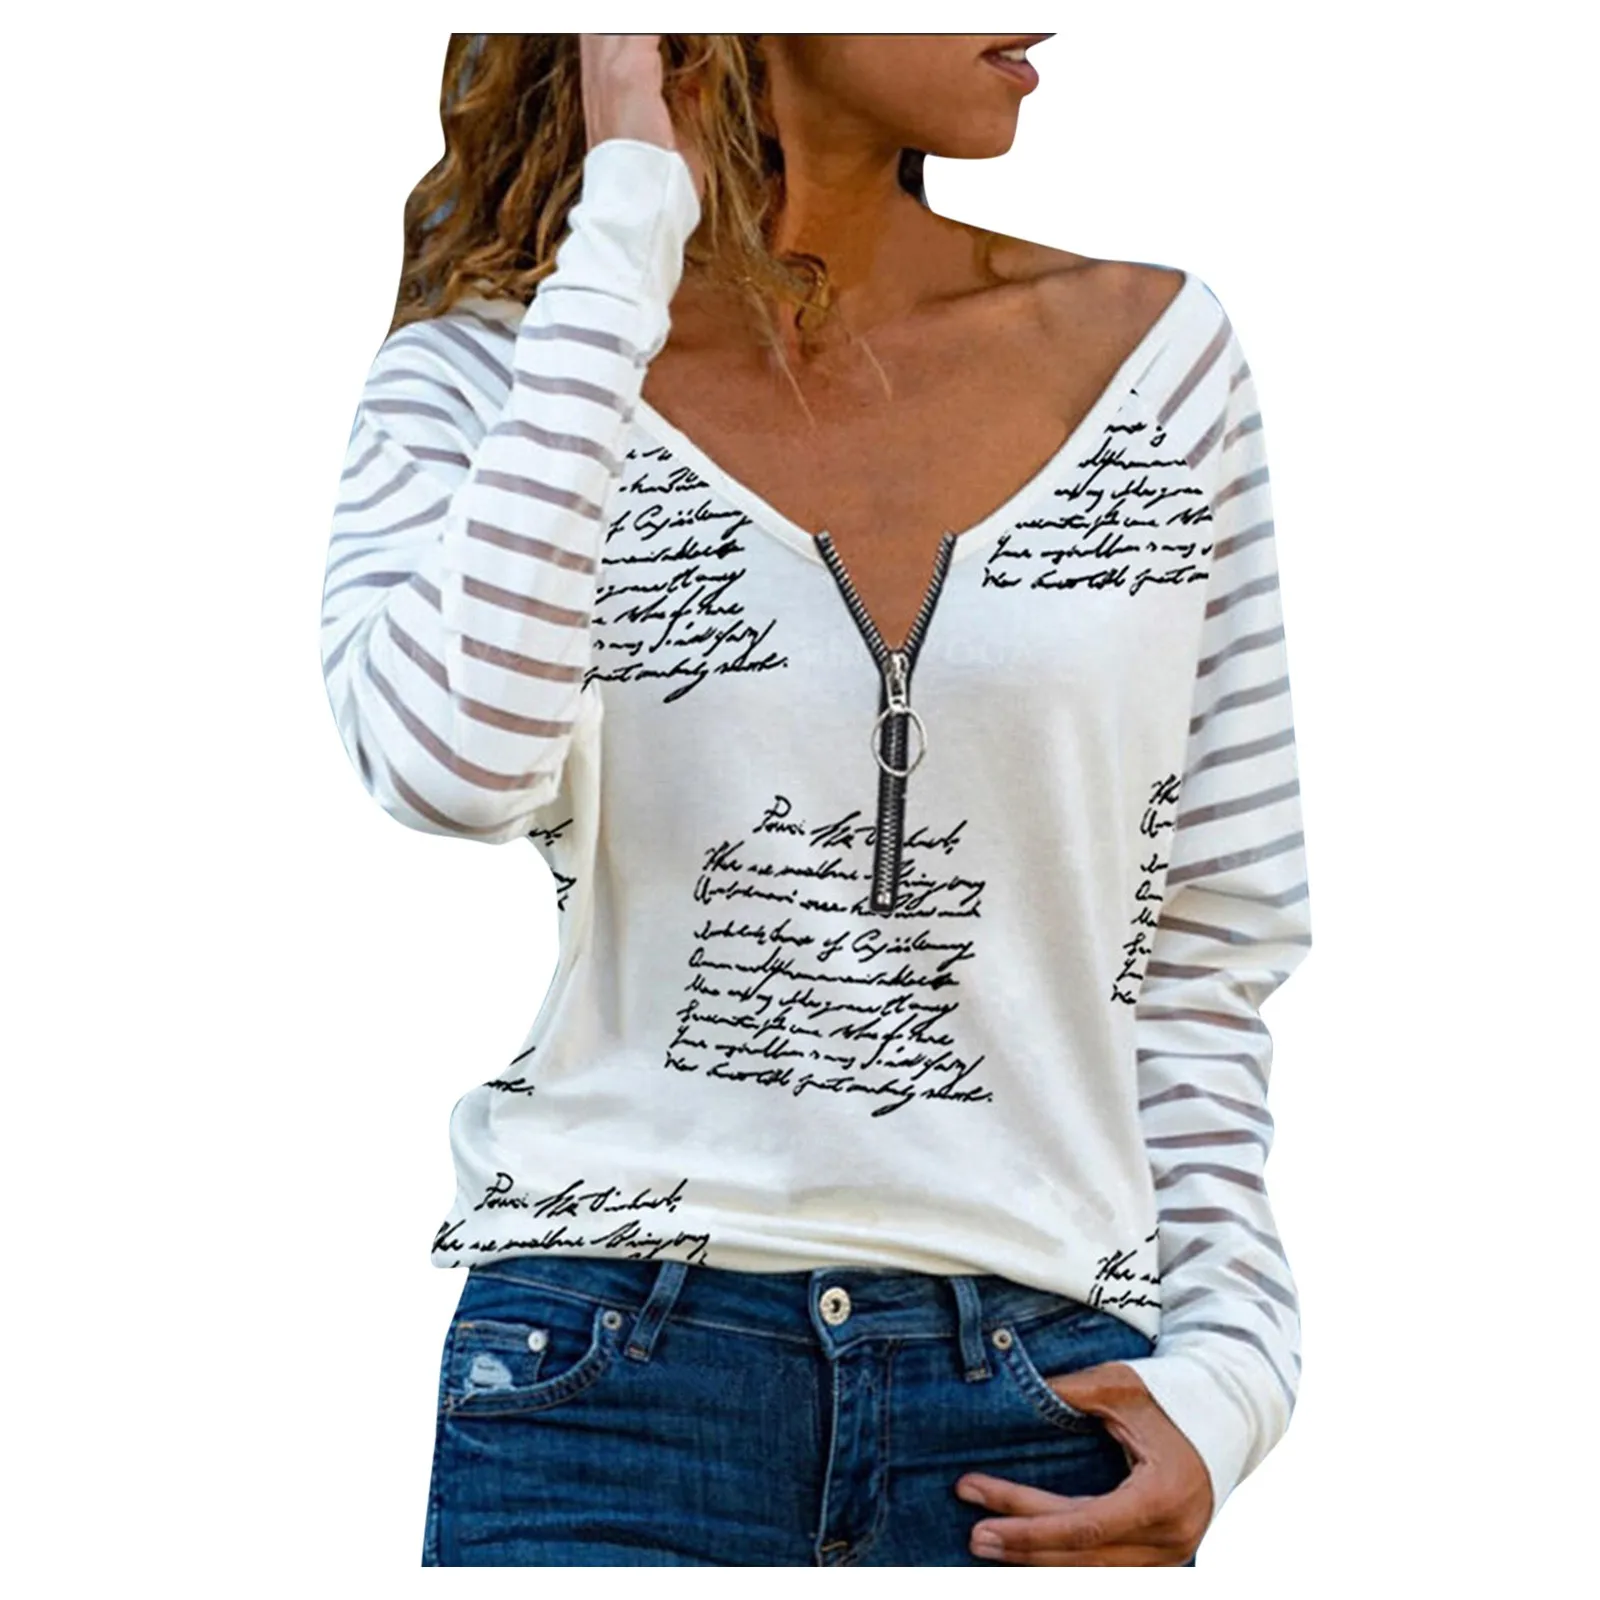 Women's Shirts Tees Long Sleeve Love Heart Print Fashion Zipper Blouse Top for Spring Sexy Casual Tops Female Clothes